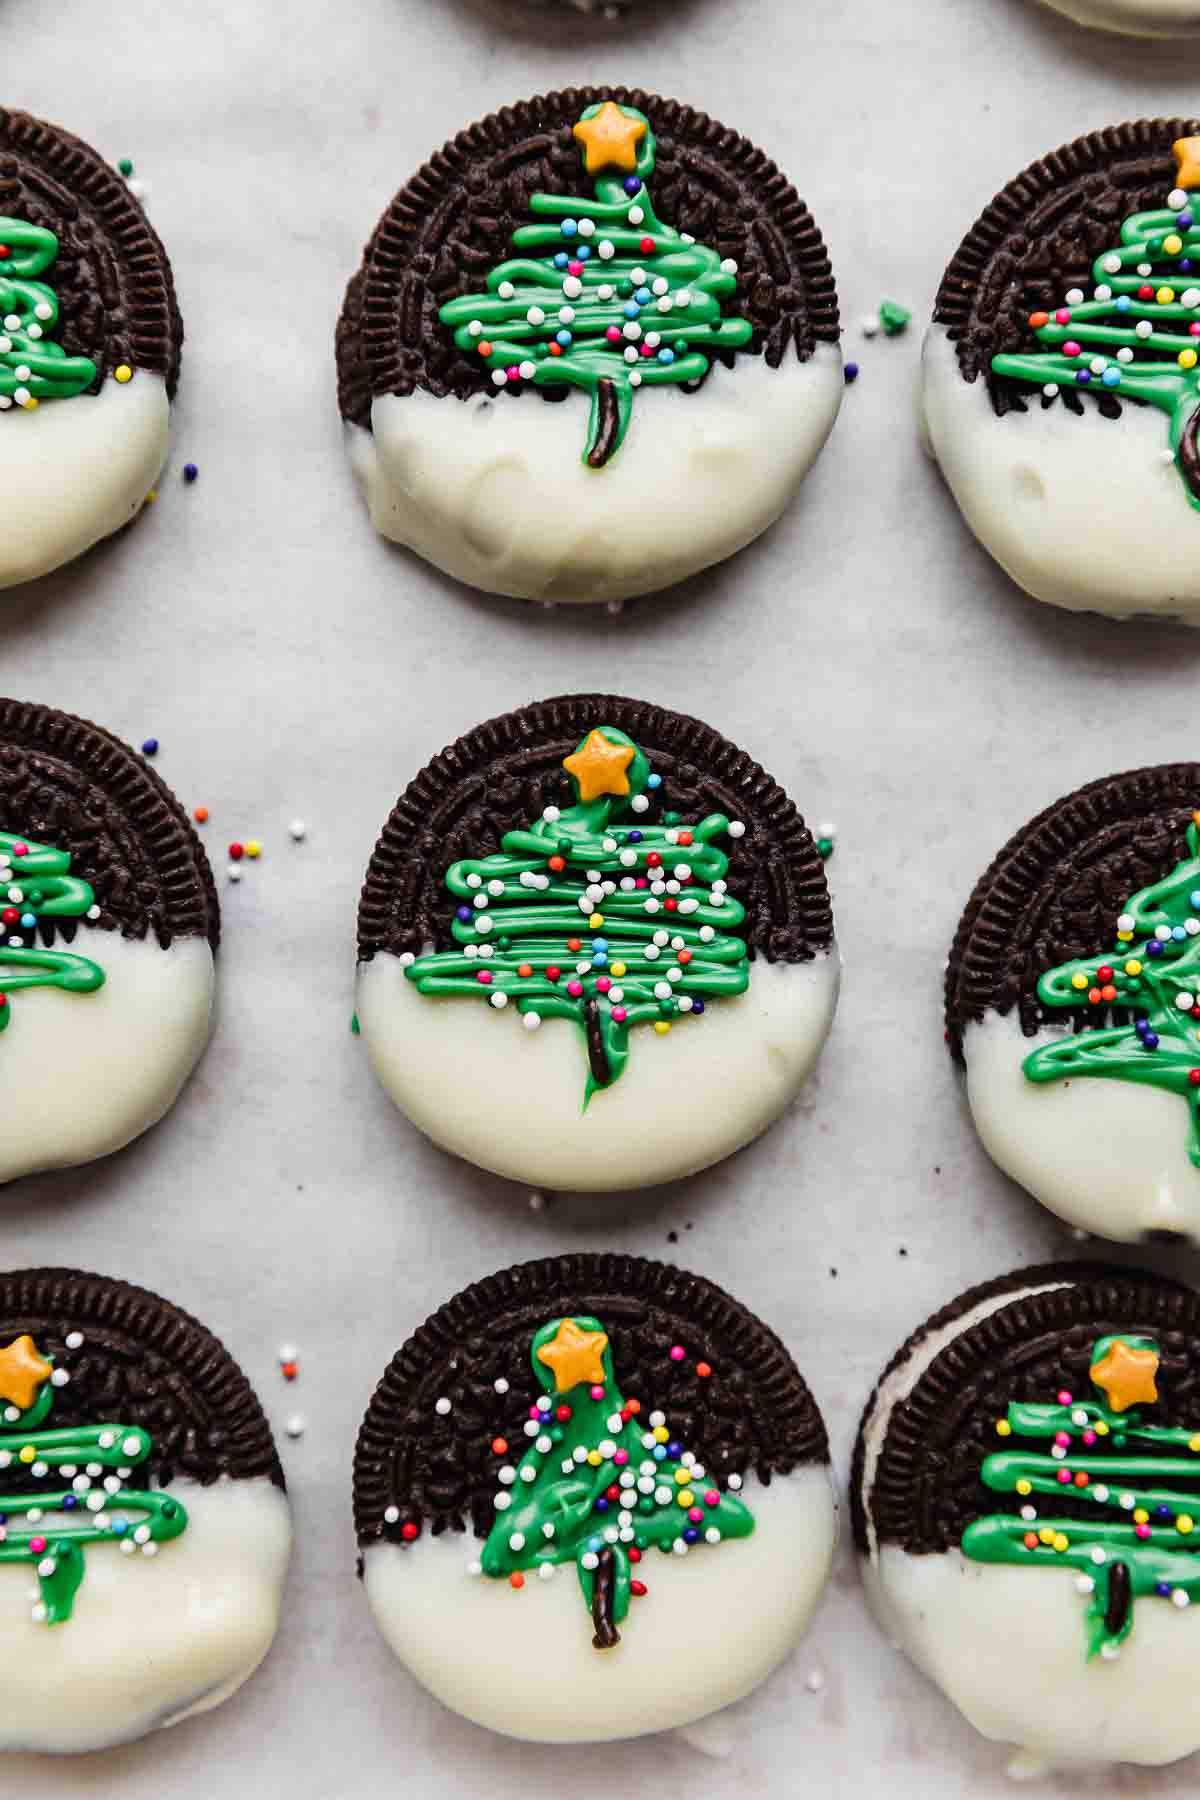 White parchment paper lined with Christmas Oreos (Christmas Trees piped onto half dipped white chocolate Oreos).